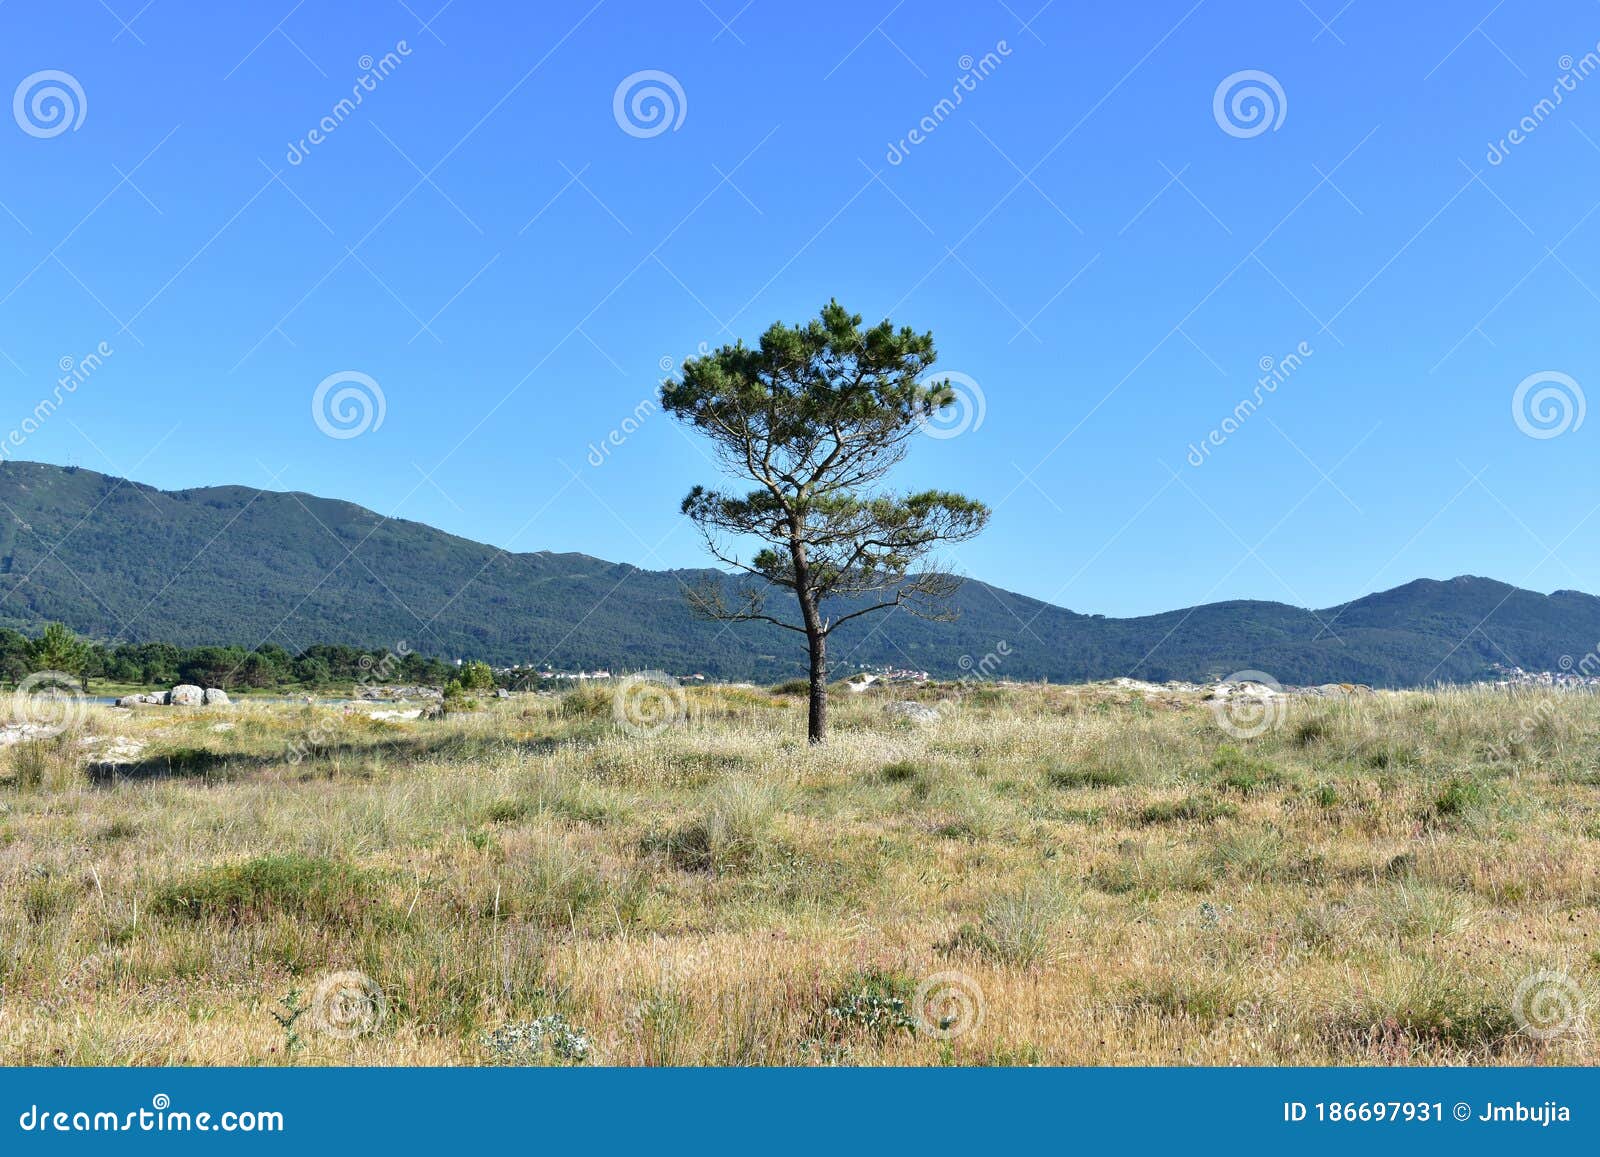 pine tree on a beach with grass in sand dunes and blue sky. carnota, galicia, spain.